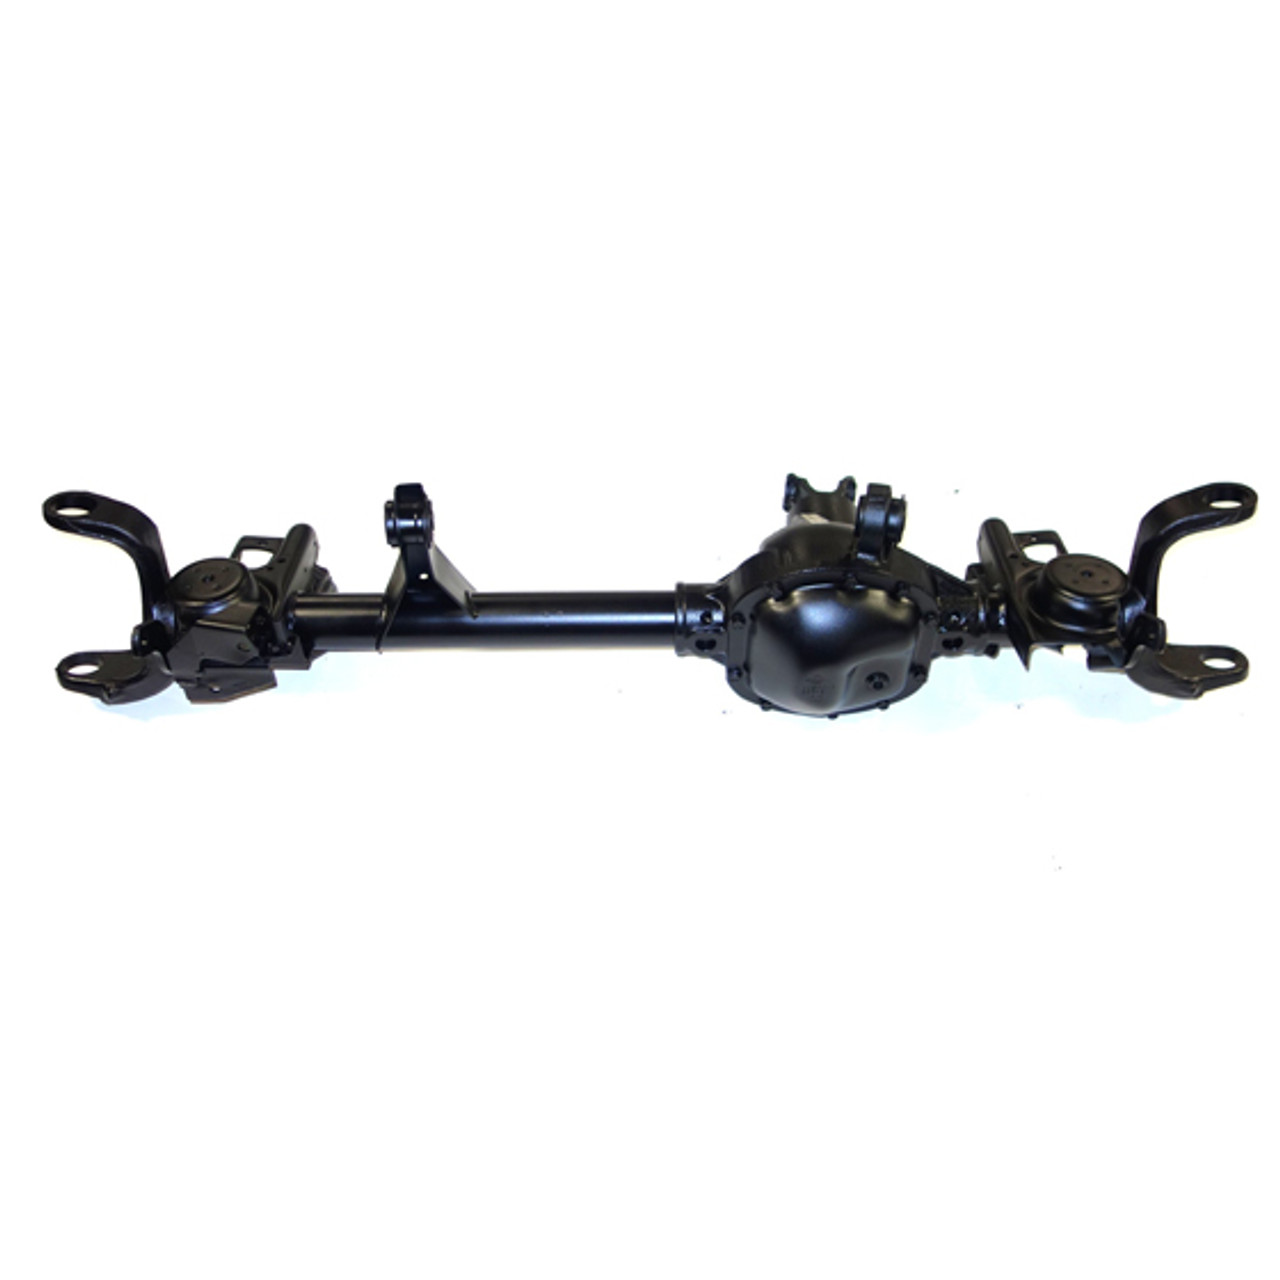 Reman Complete Axle Assembly for Dana 30 97-99 Jeep Wrangler 3.55 Ratio with ABS